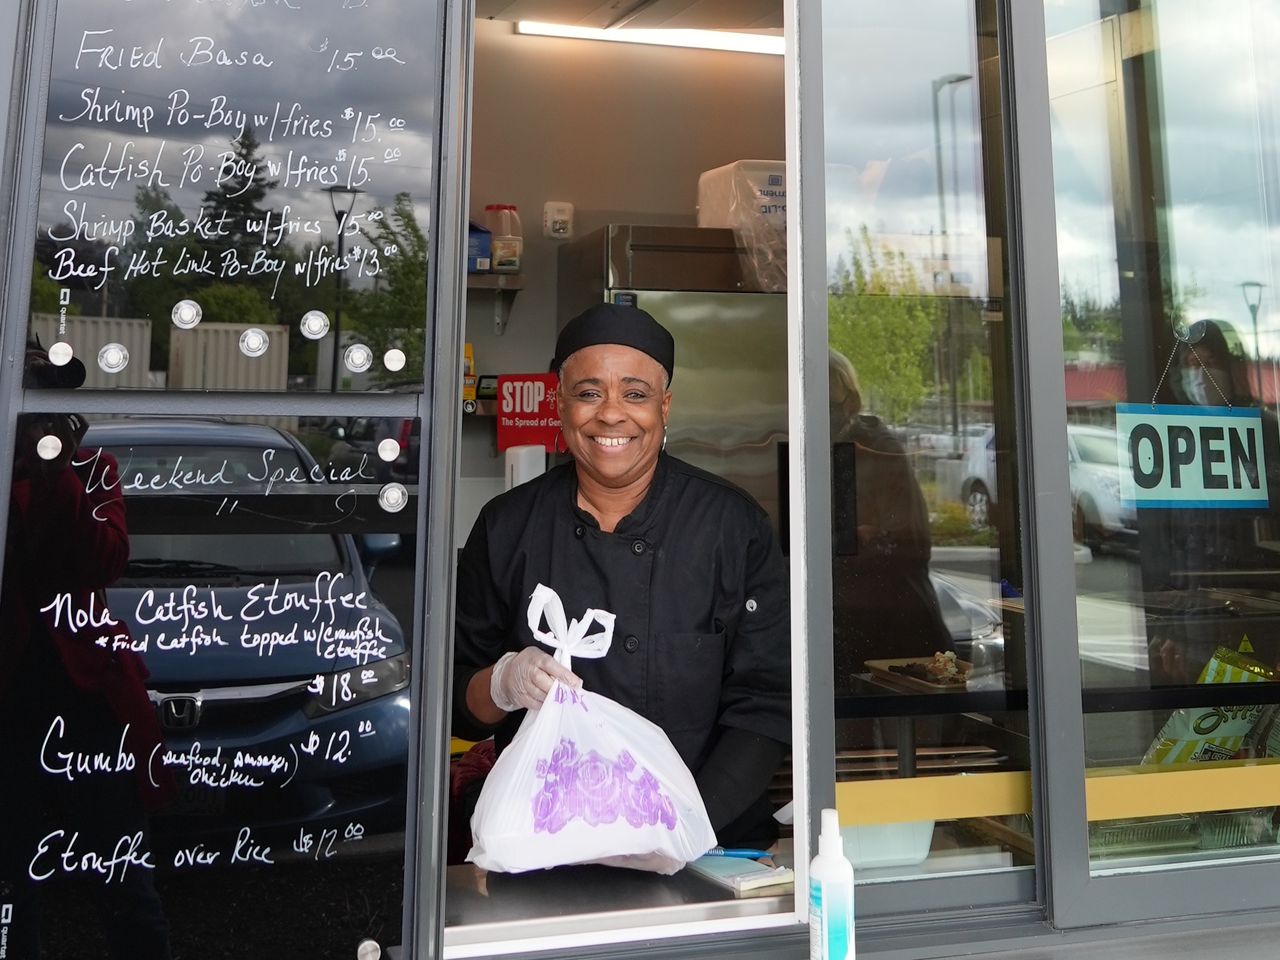 smiling woman hands a container of food from a restaurant ordering window